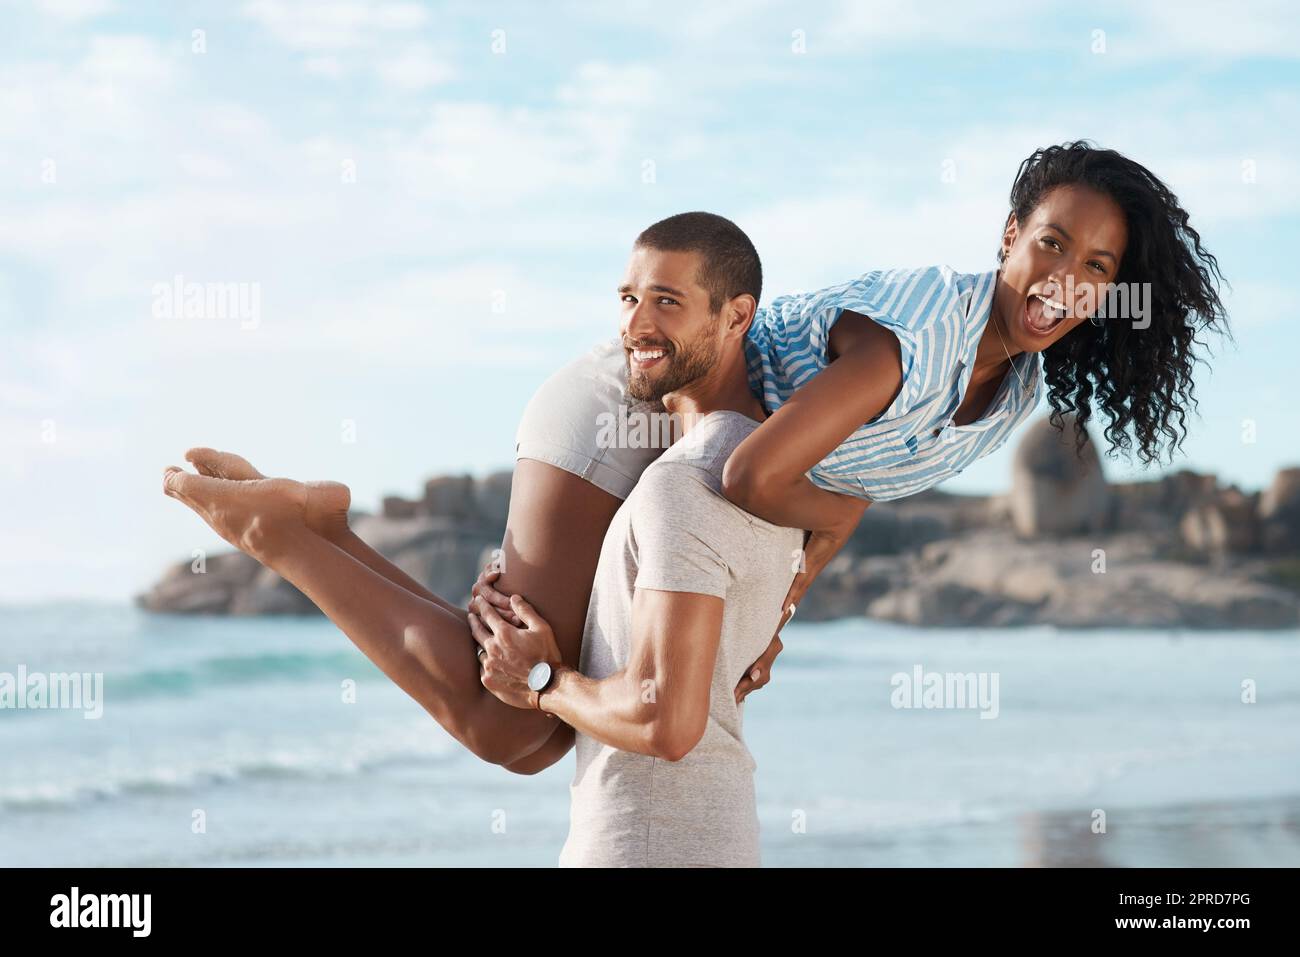 Theres no bigger joy than being together. Portrait of a young couple enjoying some quality time together at the beach. Stock Photo